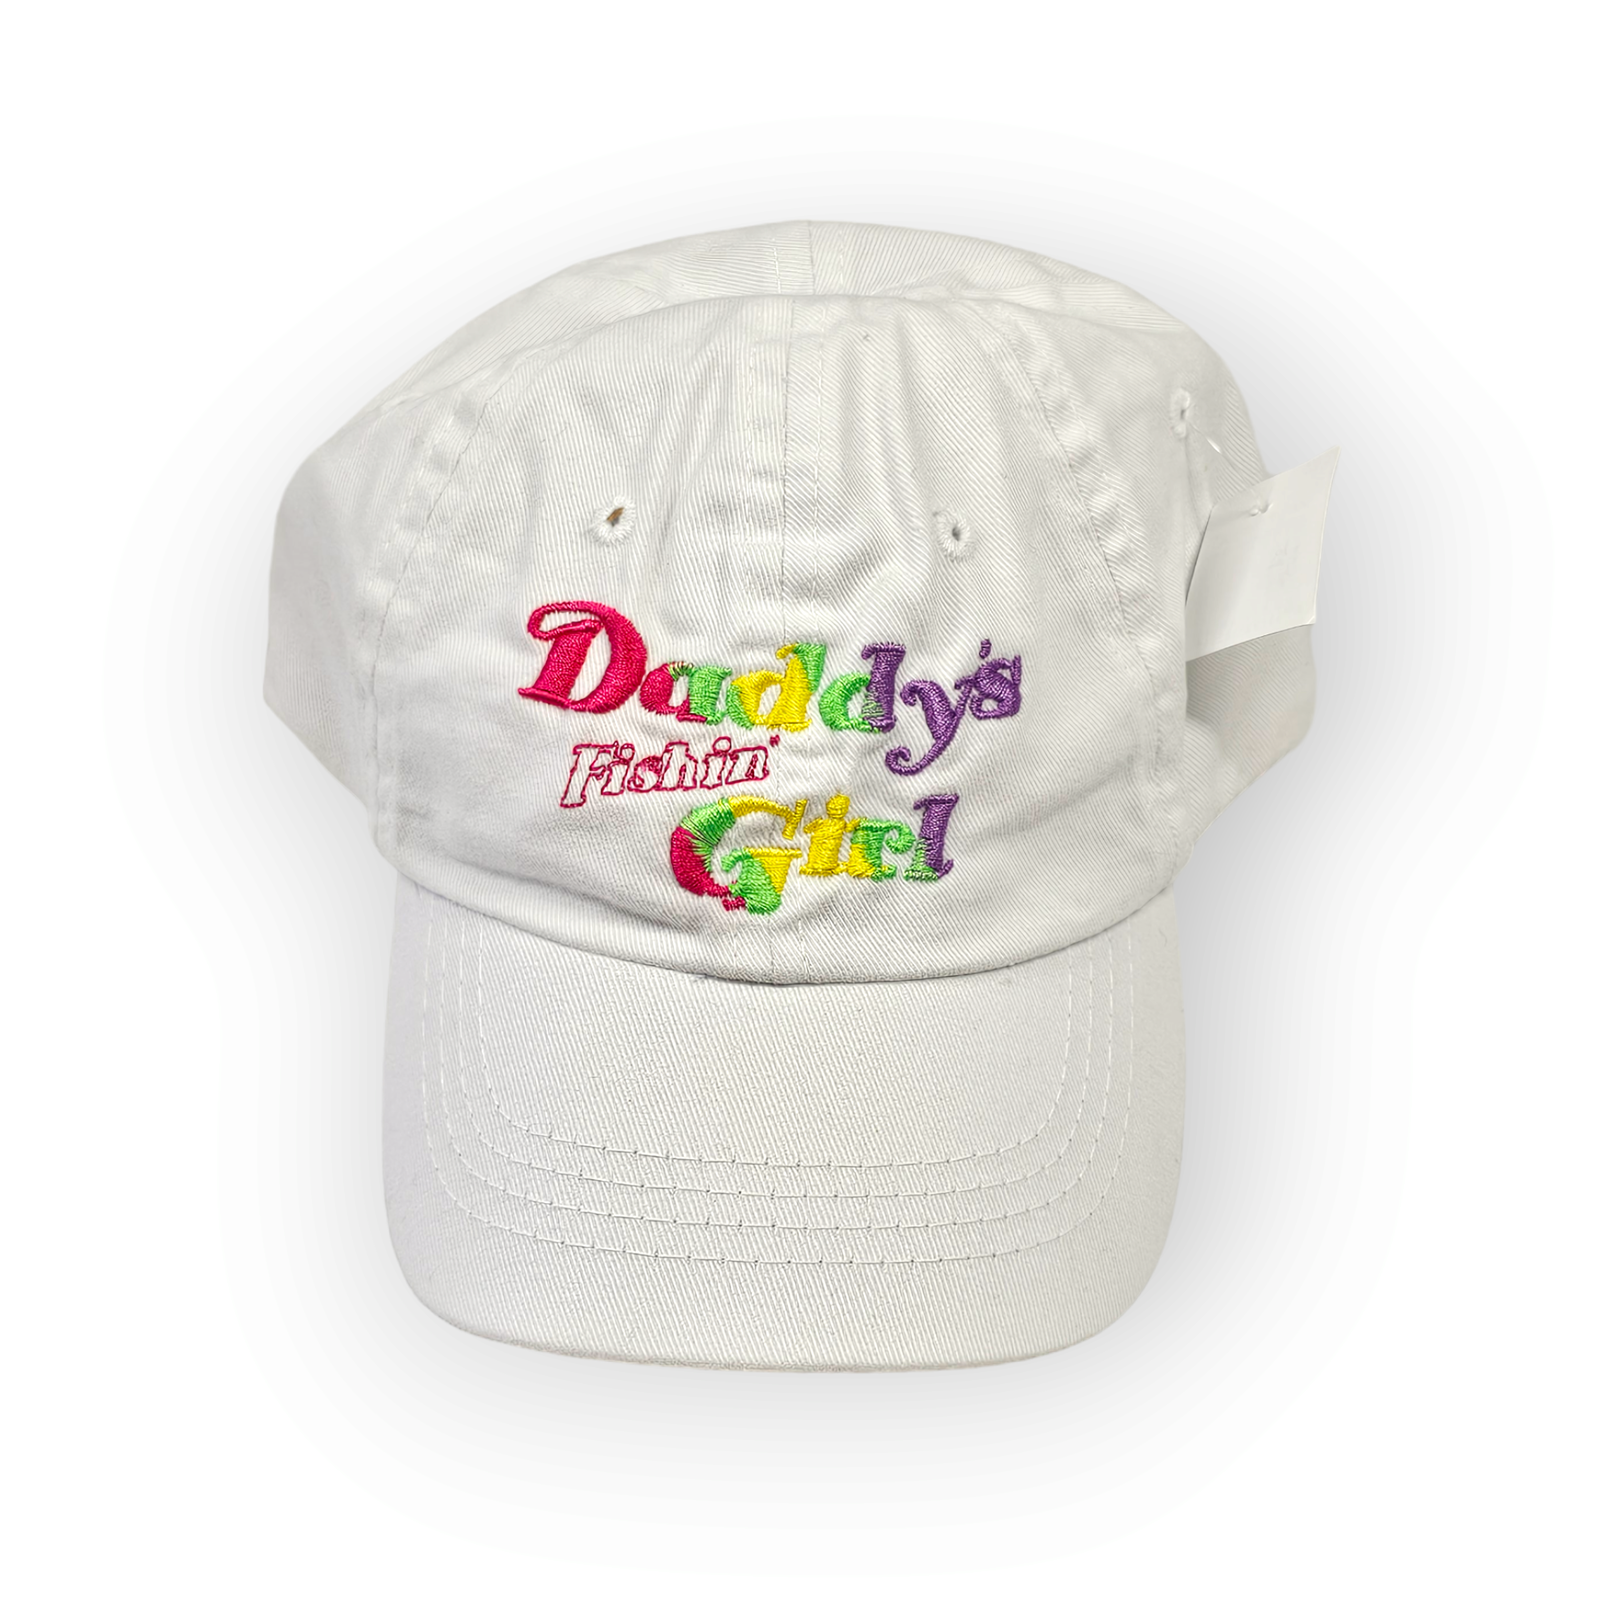 Primary image for Daddys Fishin Girl Toddler Size Ball Cap Hat White Rainbow Embroidery Adjustable